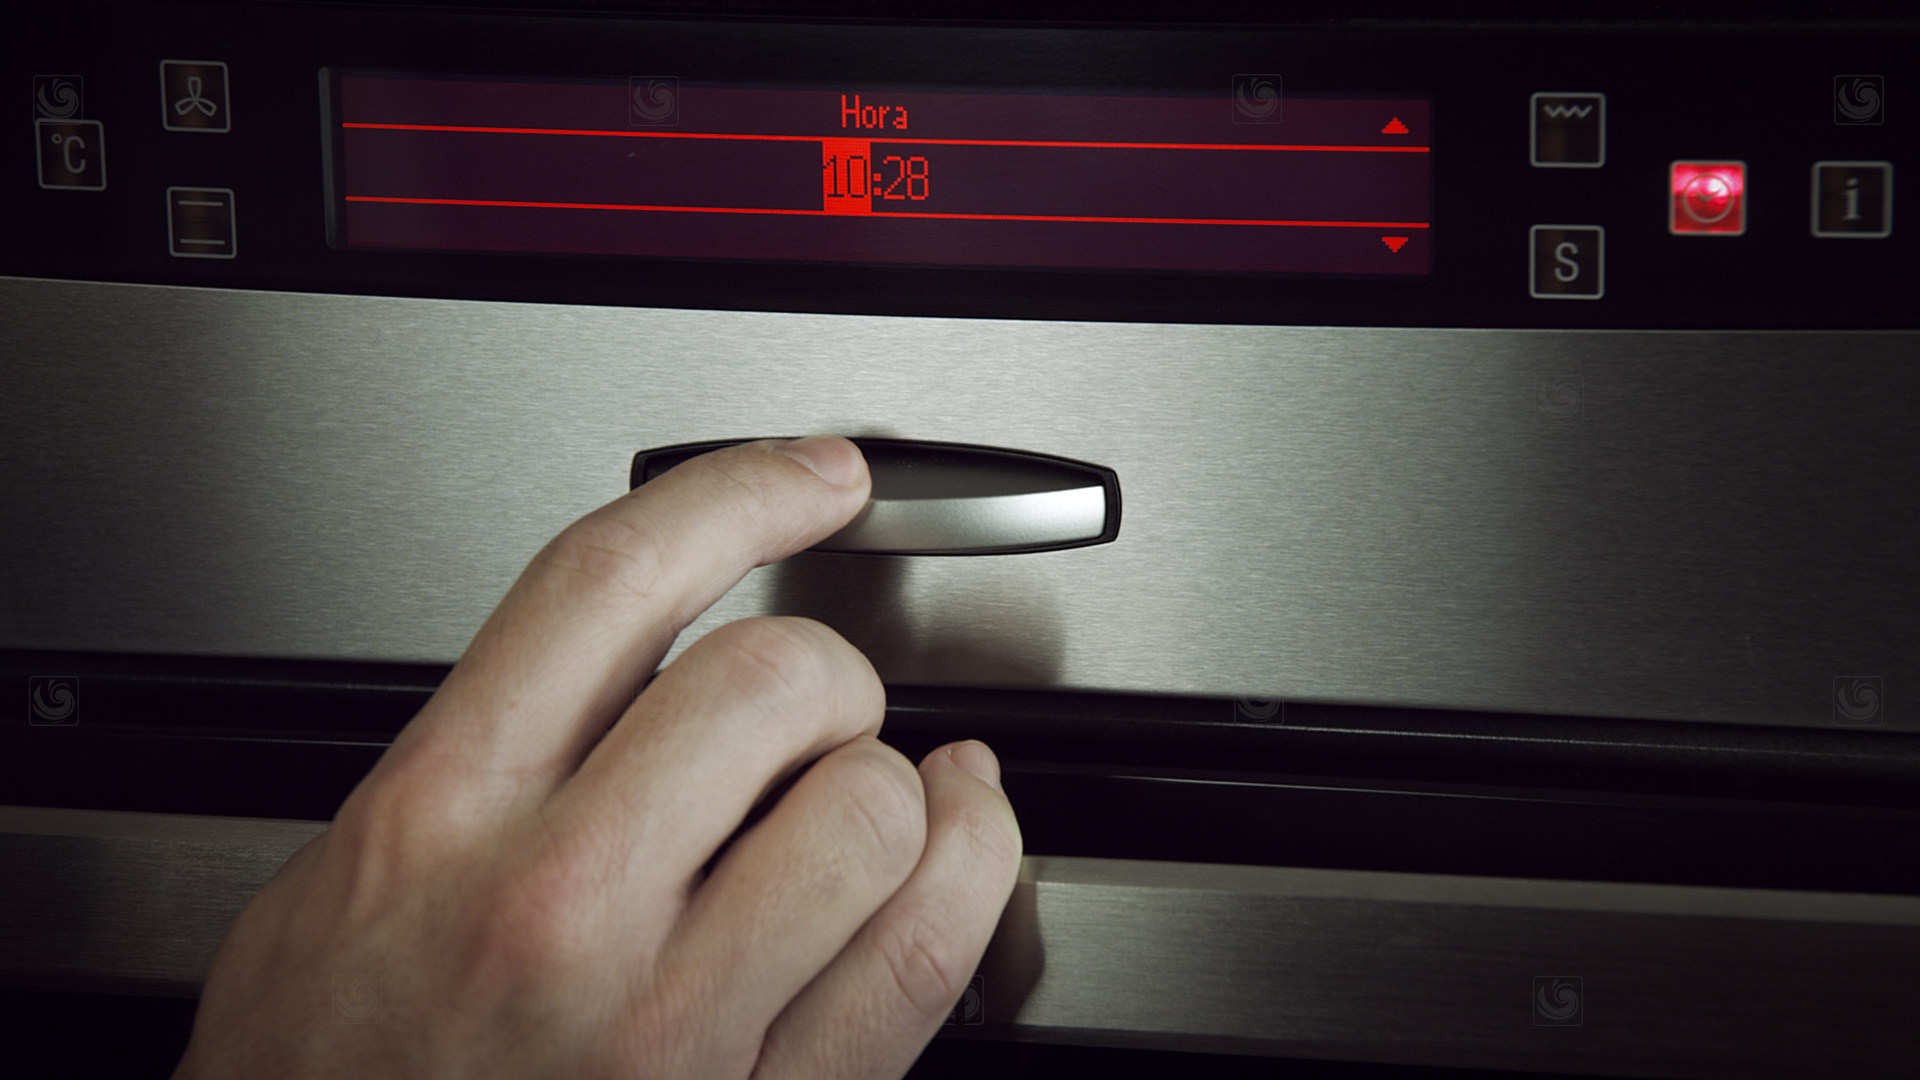 Frame from product video around Neff ovens, showing a detail of the temperature control knob